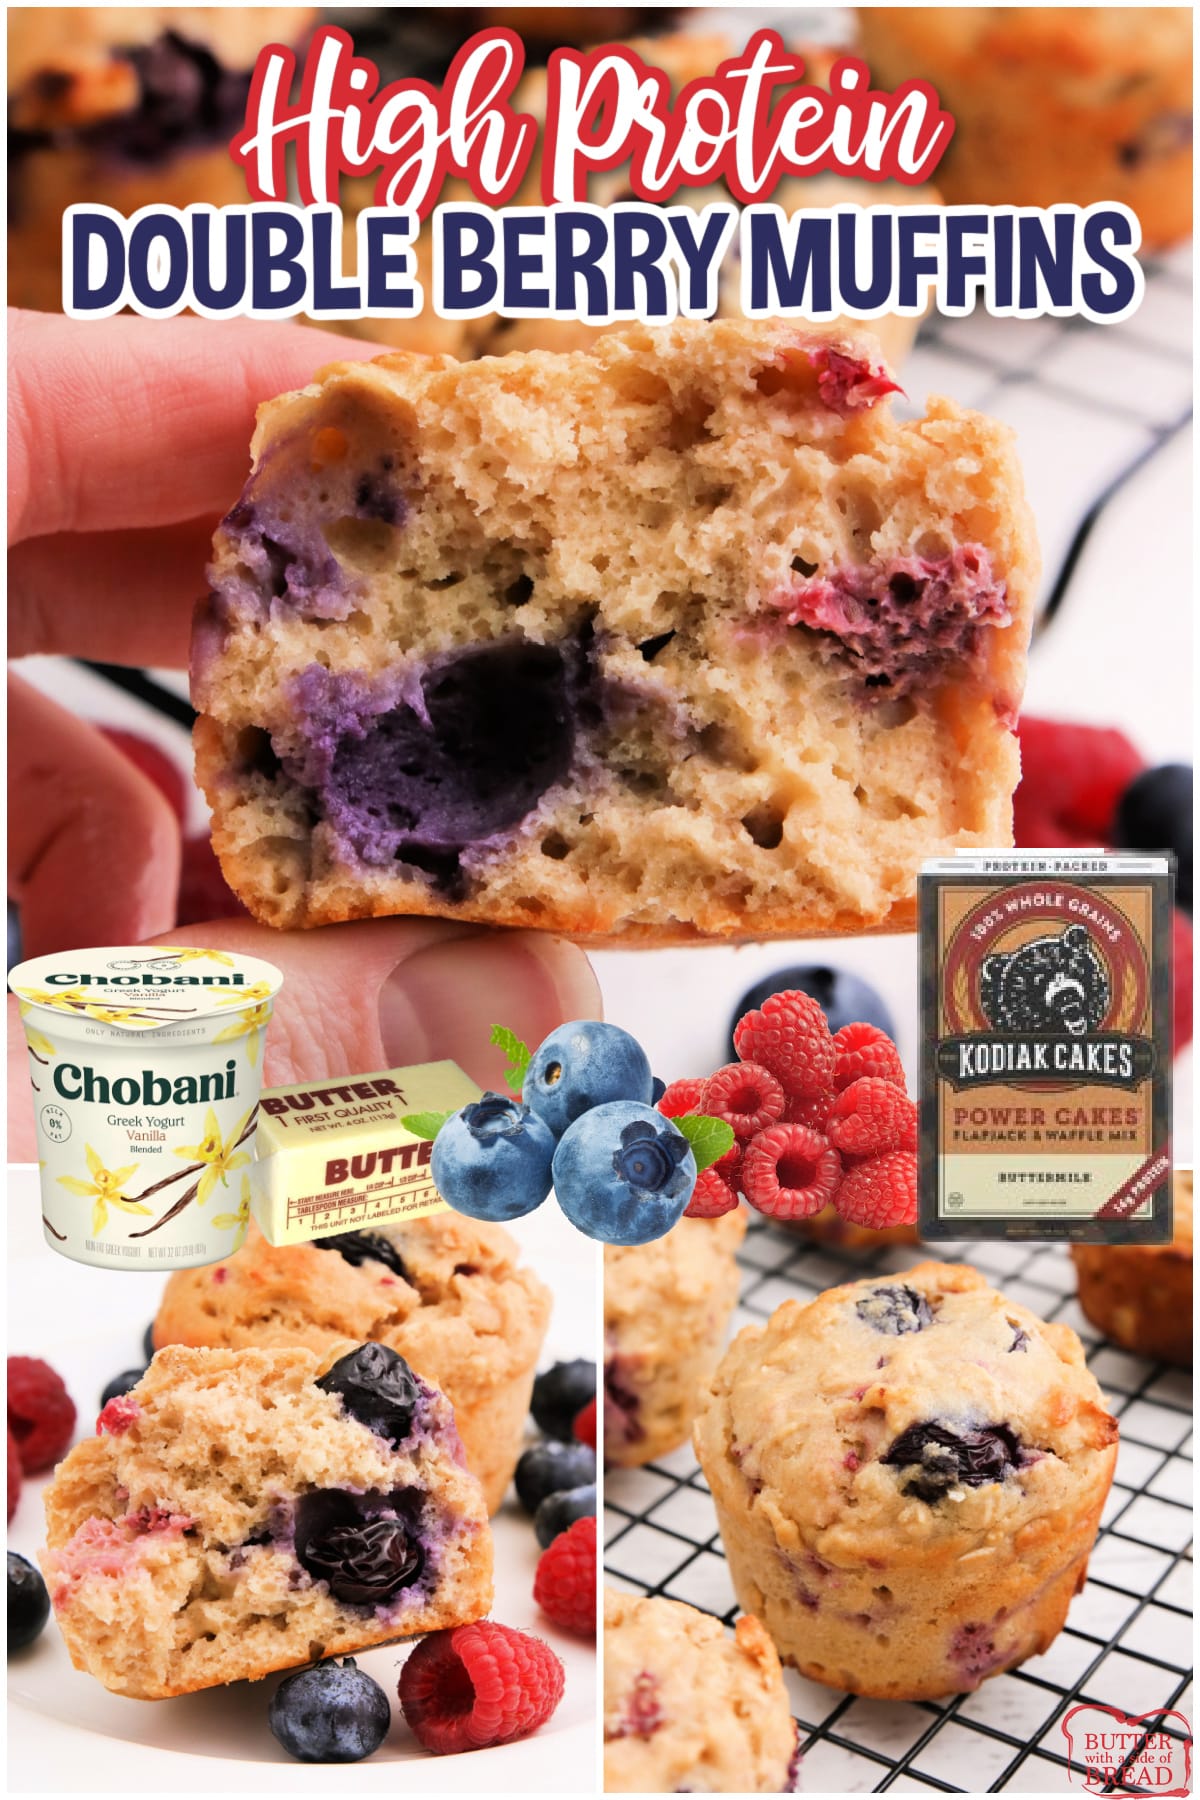 High Protein Double Berry Muffins are moist, sweet, full of blueberries and raspberries and also packed with protein. Each high protein muffin has 12 grams of protein!